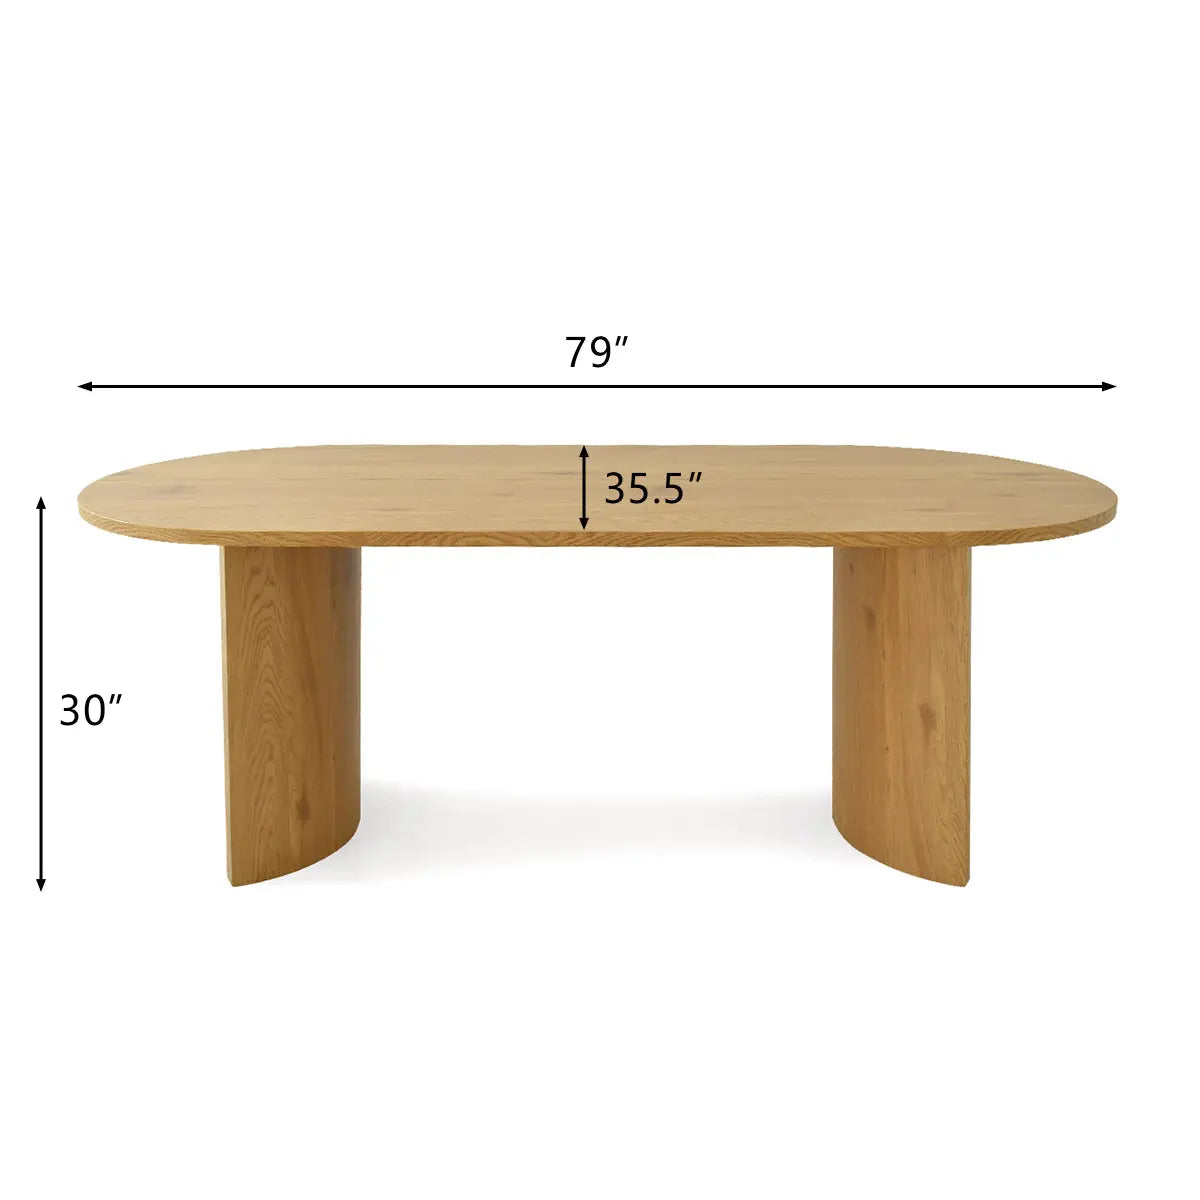 Spare Part-Dwen 79" Oval Dining Table Top - The Pop Maison